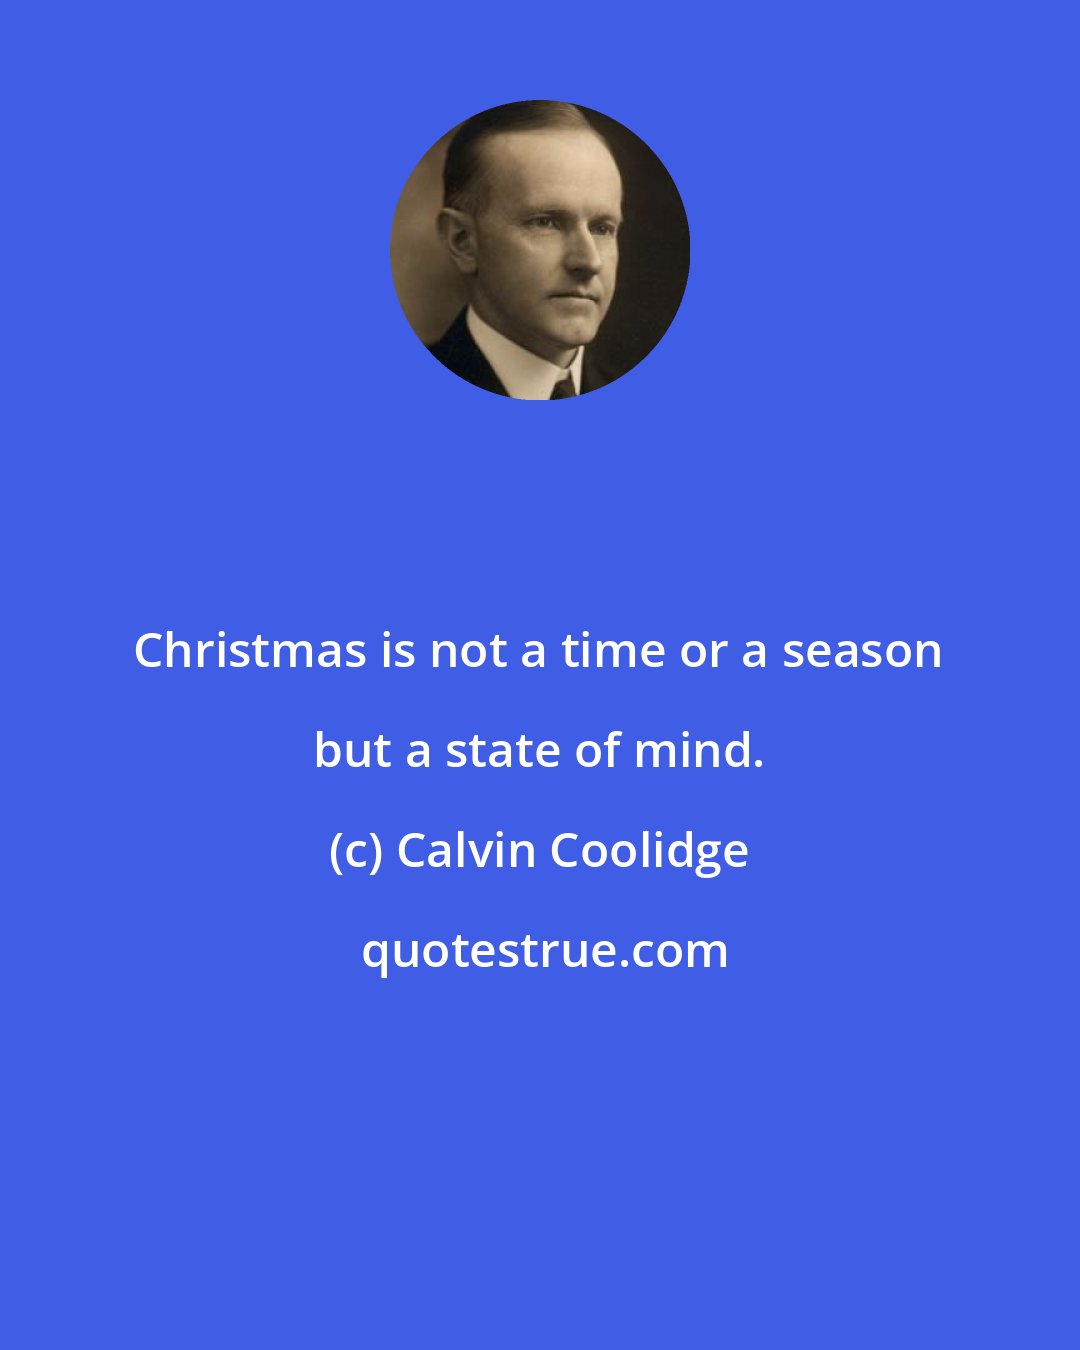 Calvin Coolidge: Christmas is not a time or a season but a state of mind.